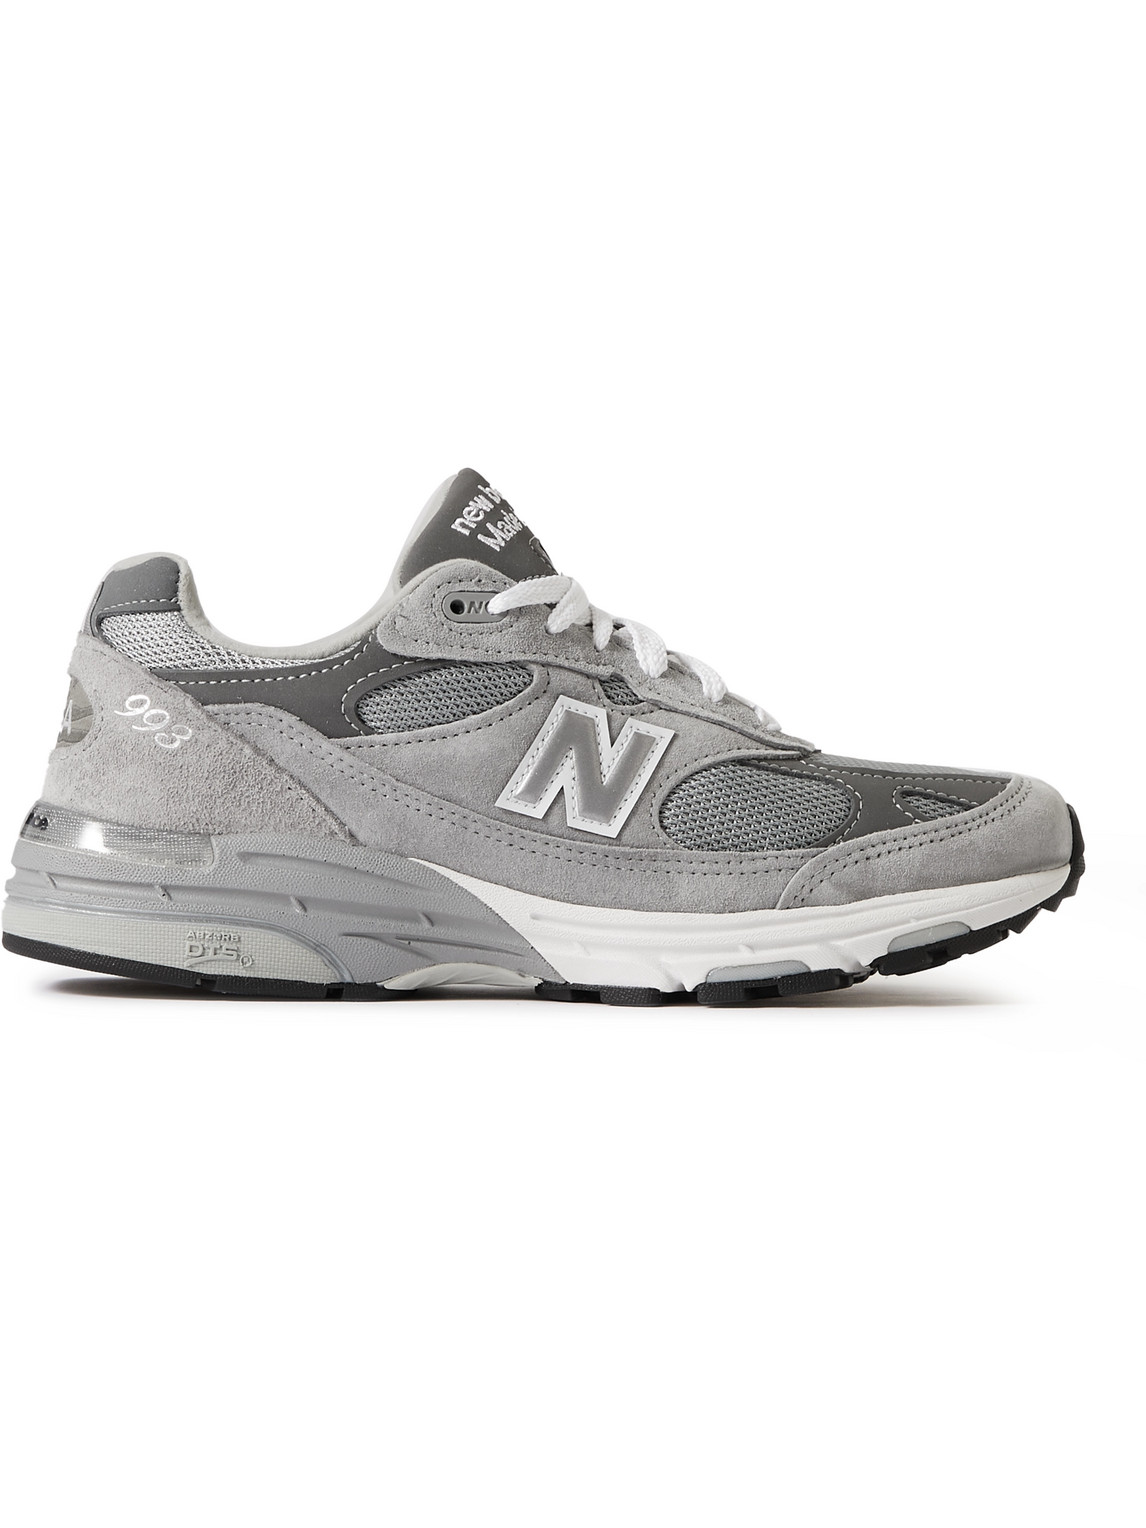 New Balance Miusa 993 Suede, Mesh And Leather Sneakers In Gray